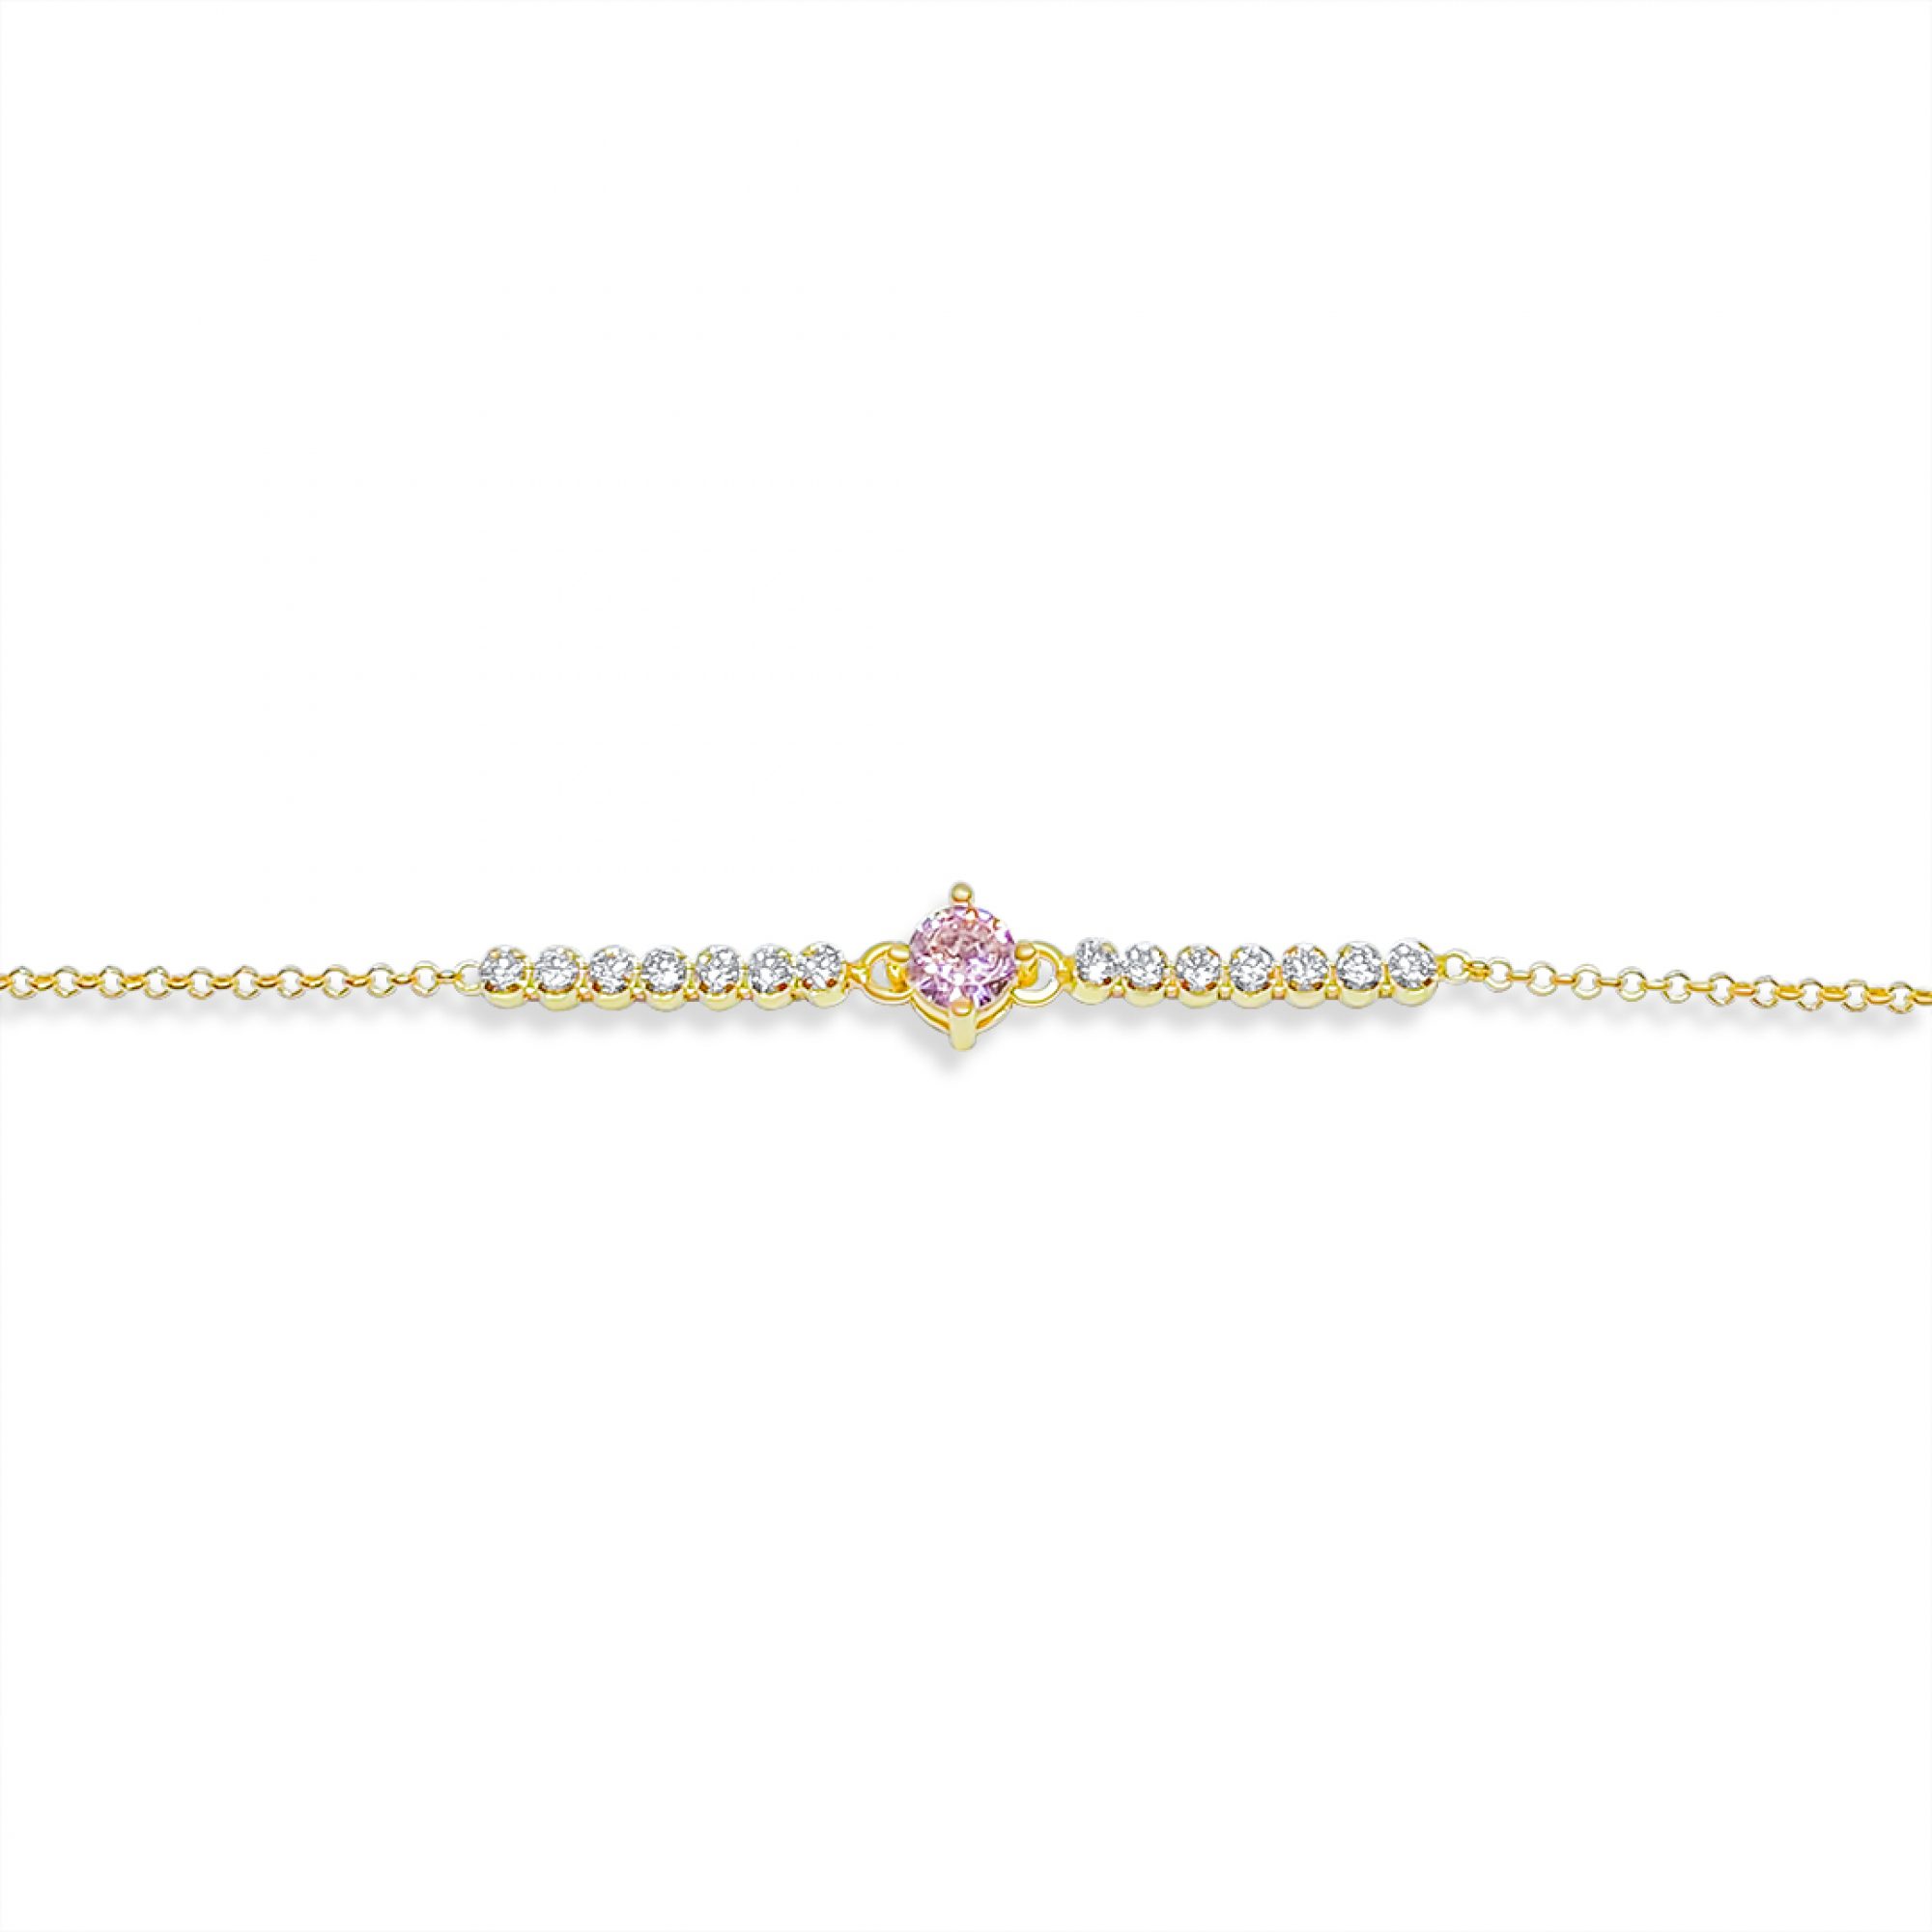 Gold plated bracelet with zircon and pink quartz stones 